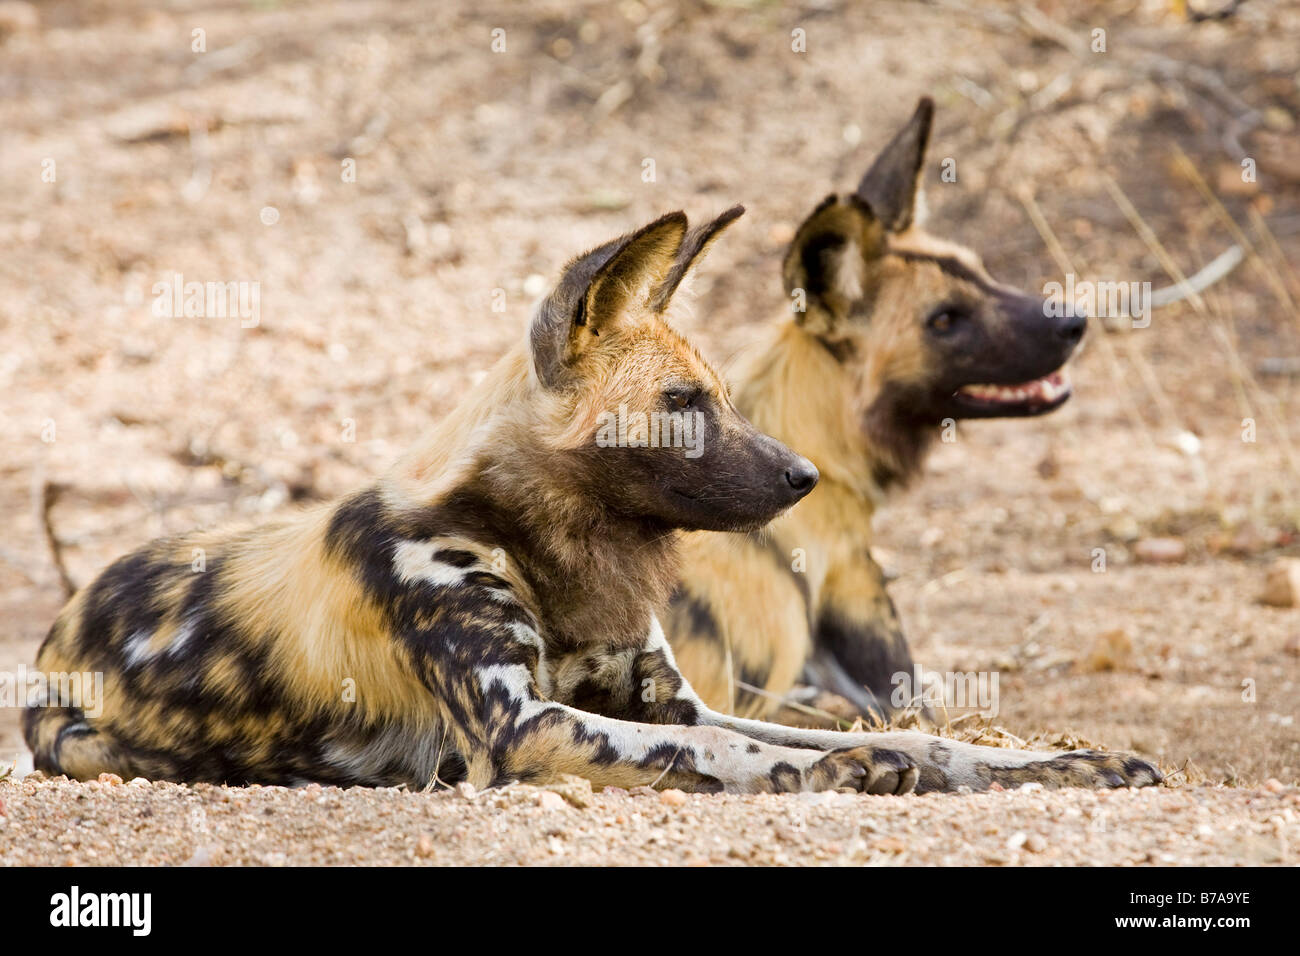 African Wild Dogs (Lycaon pictus), Kruger National Park, South Africa Stock Photo